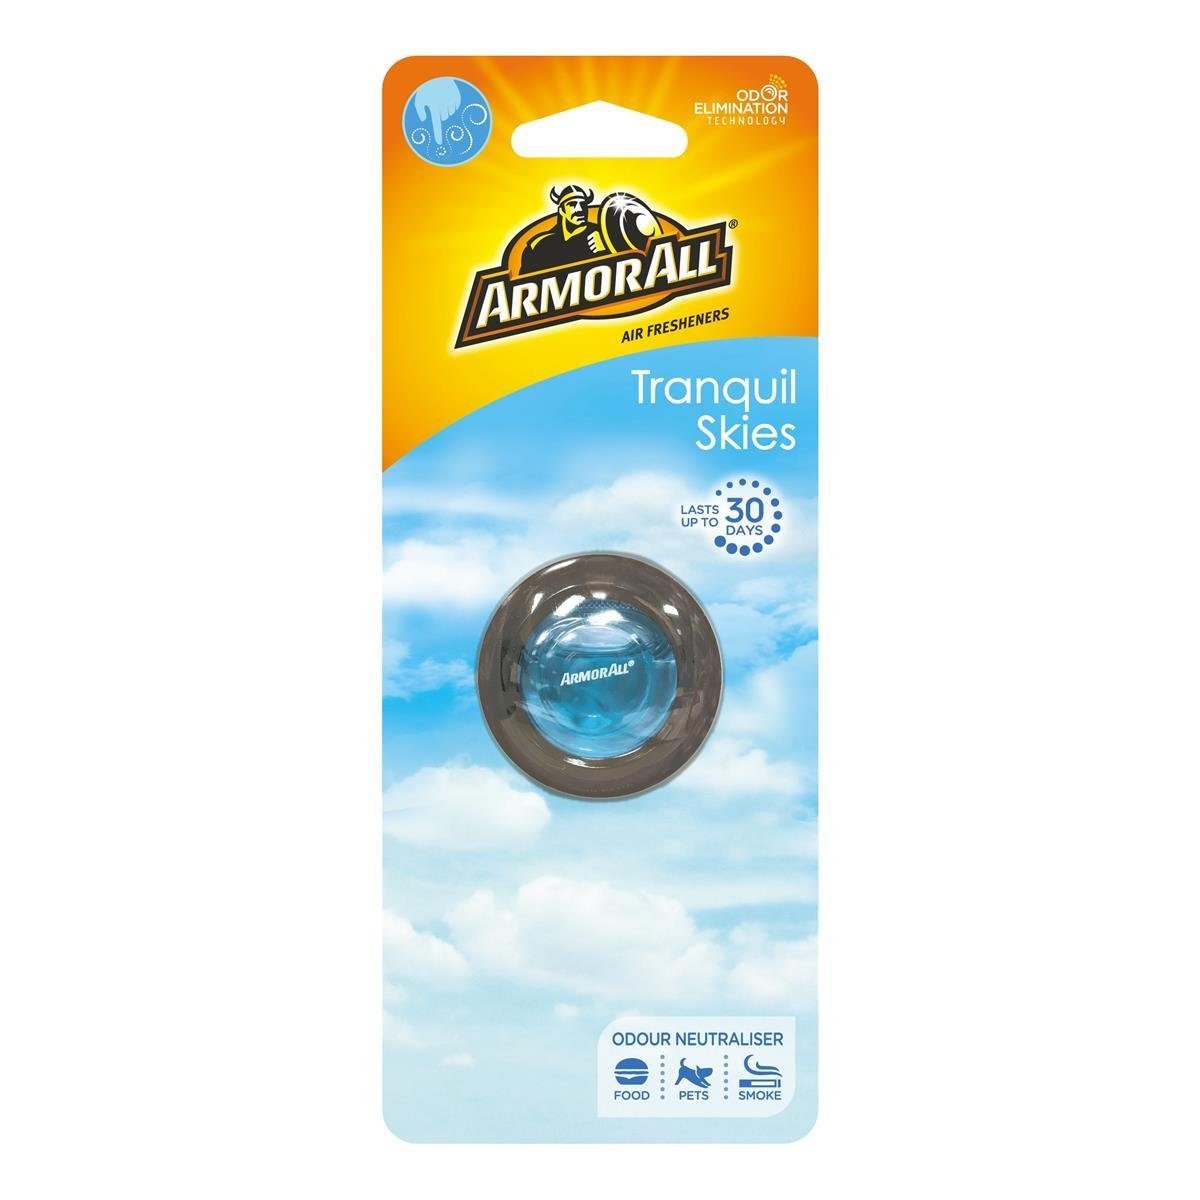 Armor All Raumduft Air Fresheners All Skies Armor 2,5ml Tranquil Pack) (1er